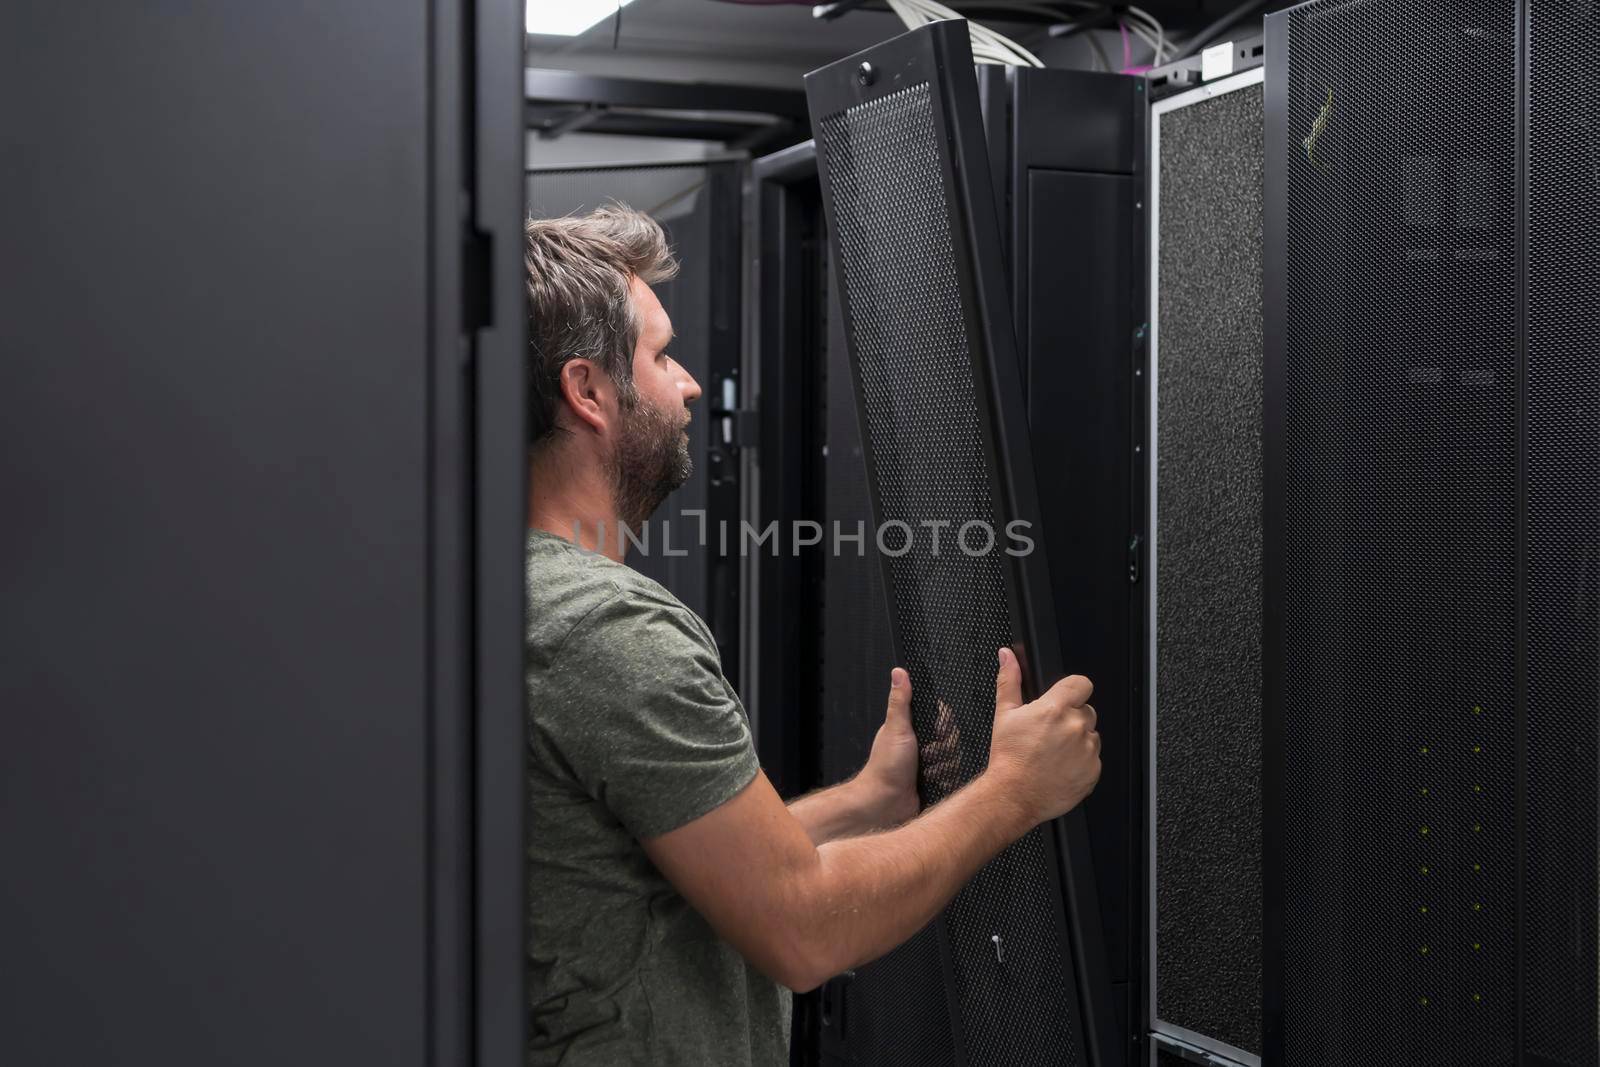 IT engineer working In the server room or data center The technician puts in a rack a new server of corporate business mainframe supercomputer or cryptocurrency mining farm. by dotshock